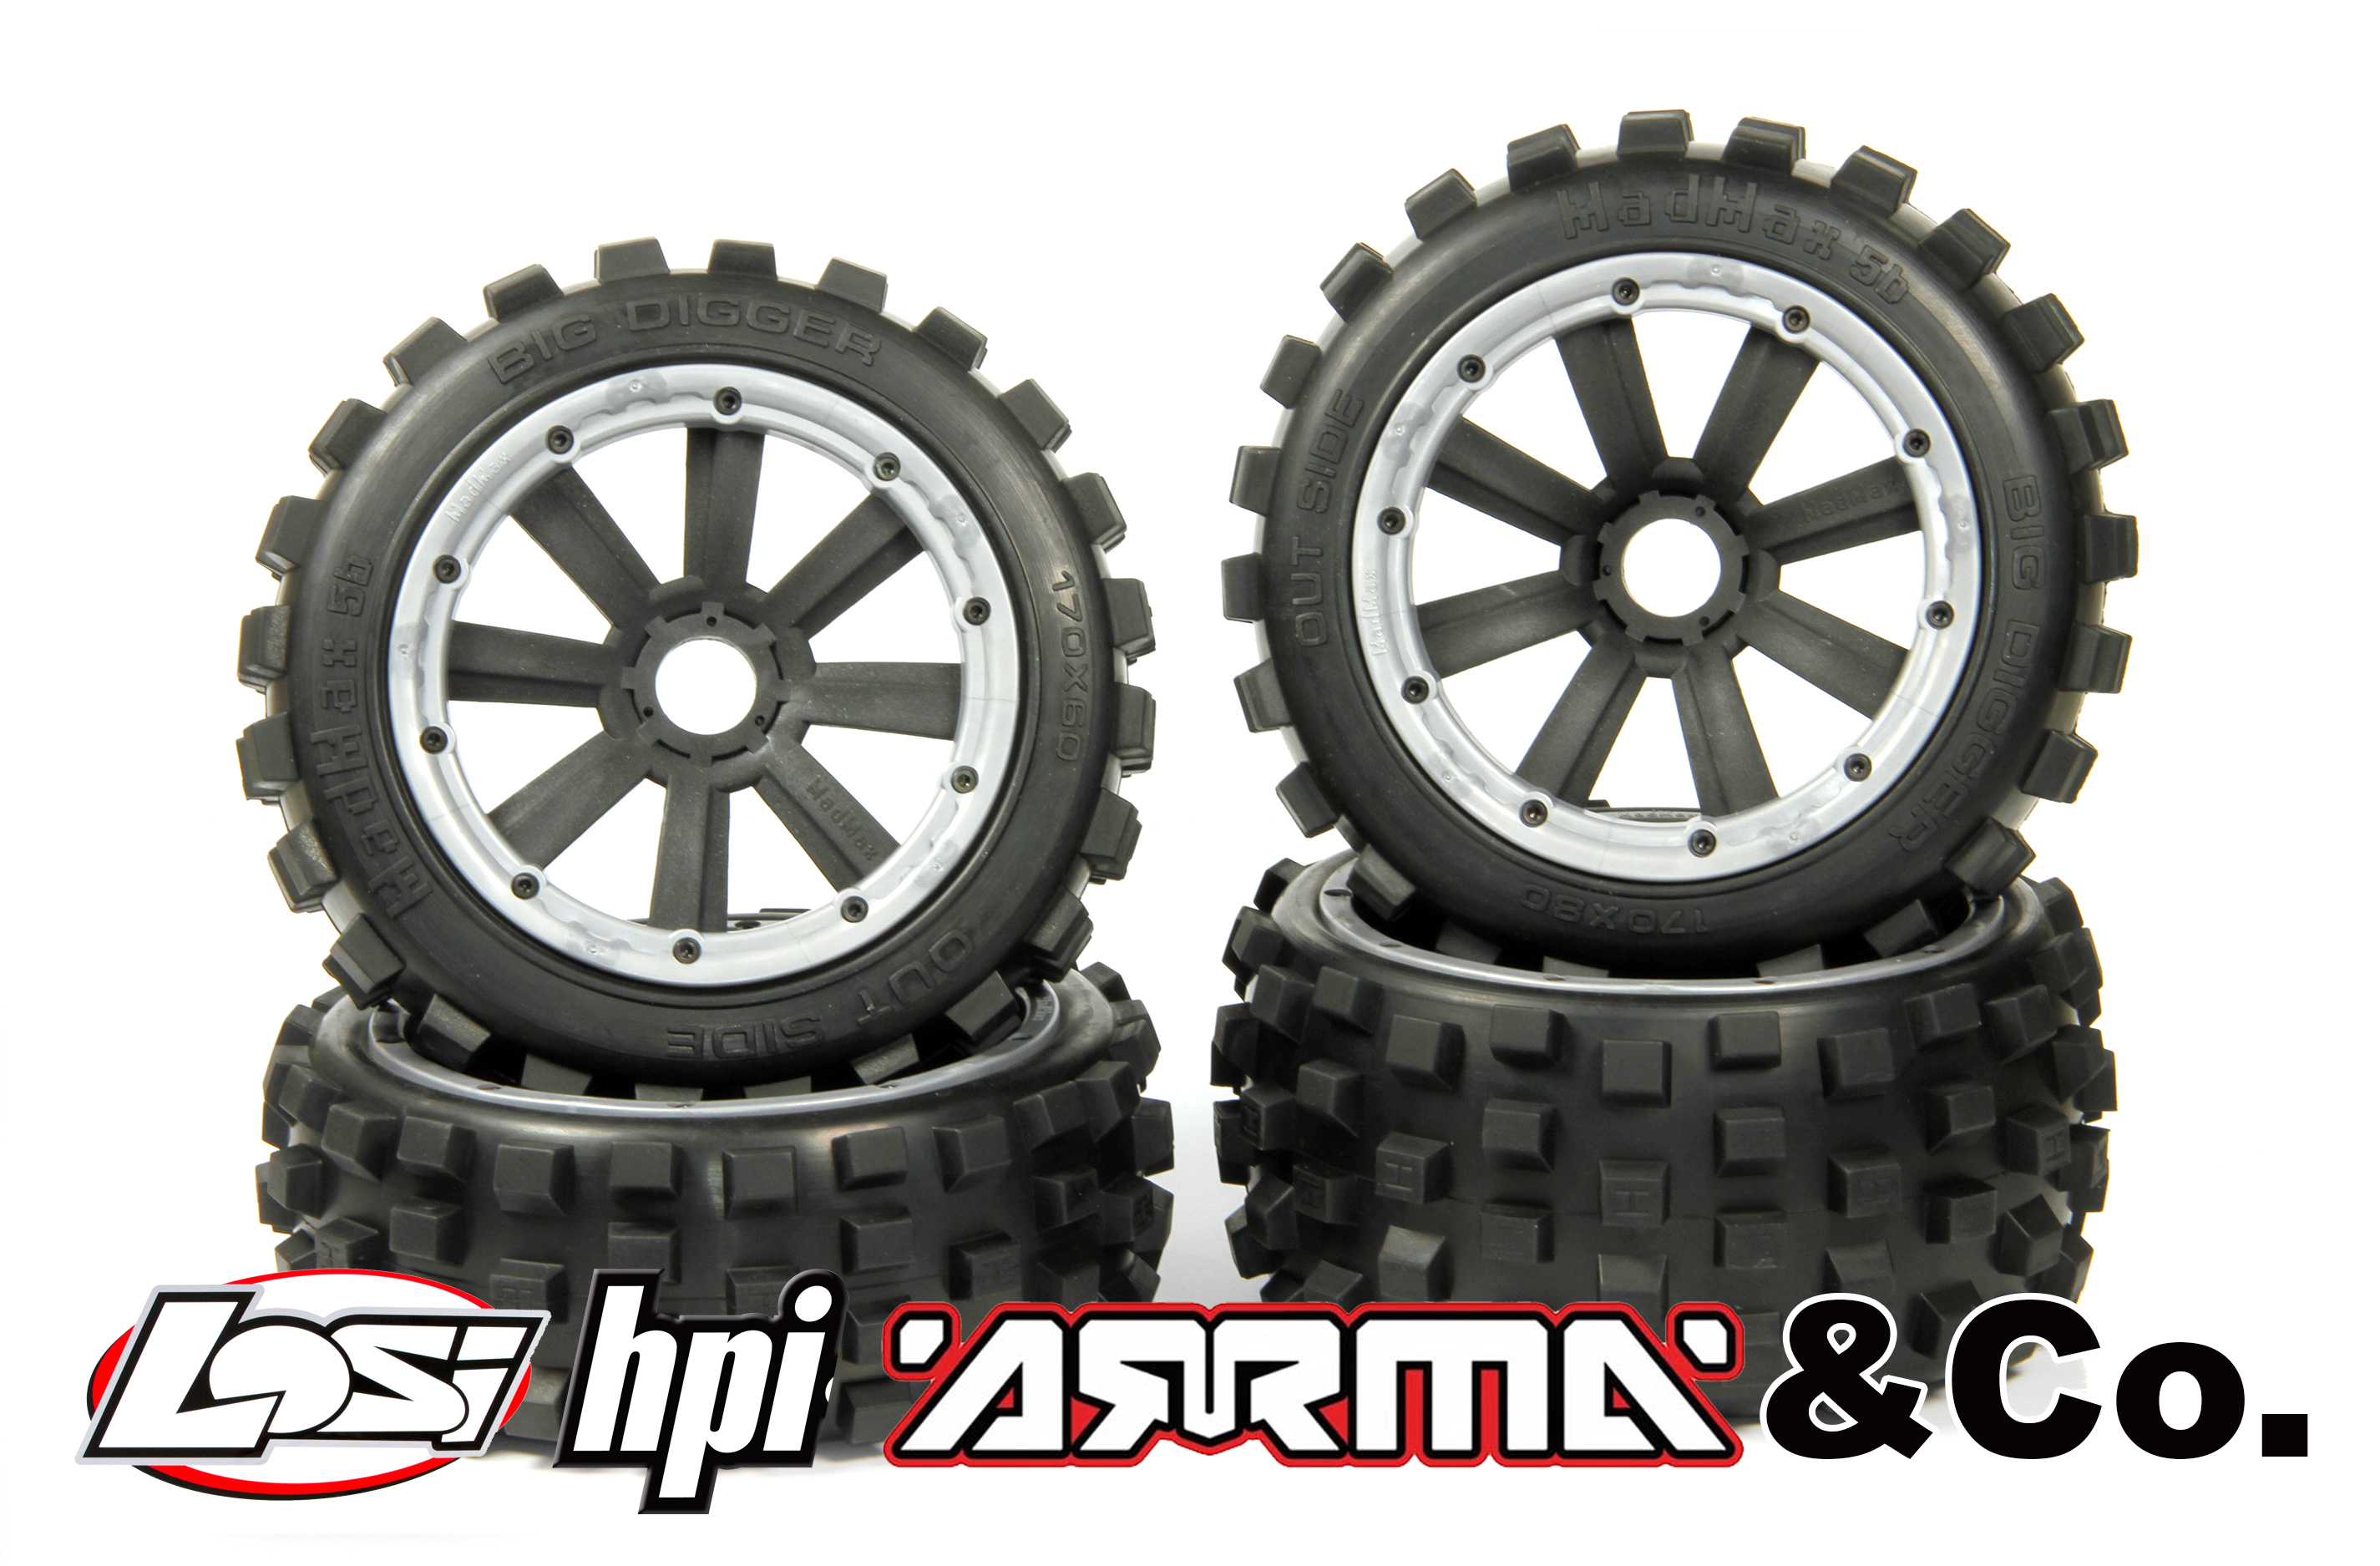 y1406/01 MadMax BIG DIGGER 170x80/x60 for HPI + Losi (24 mm hex drive)